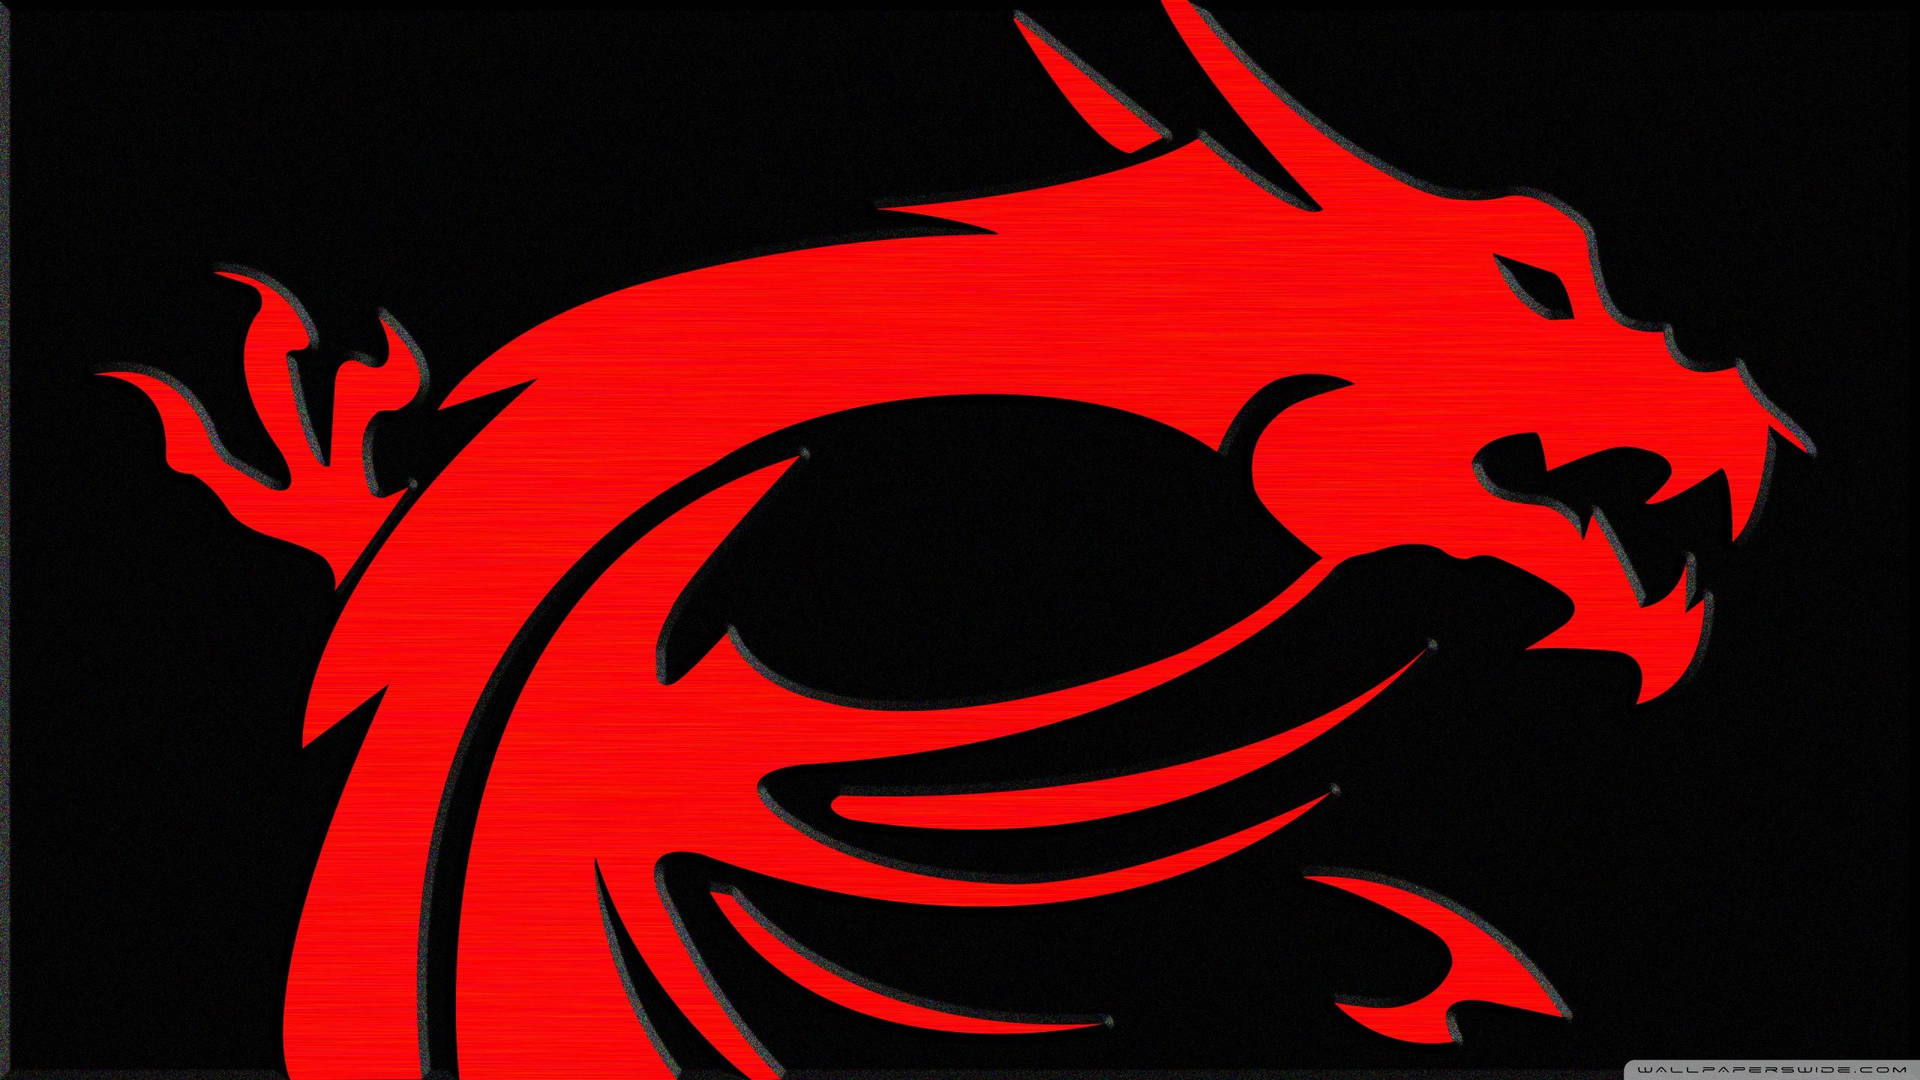 A Powerful Red Dragon on a Bold Black Background Wallpaper